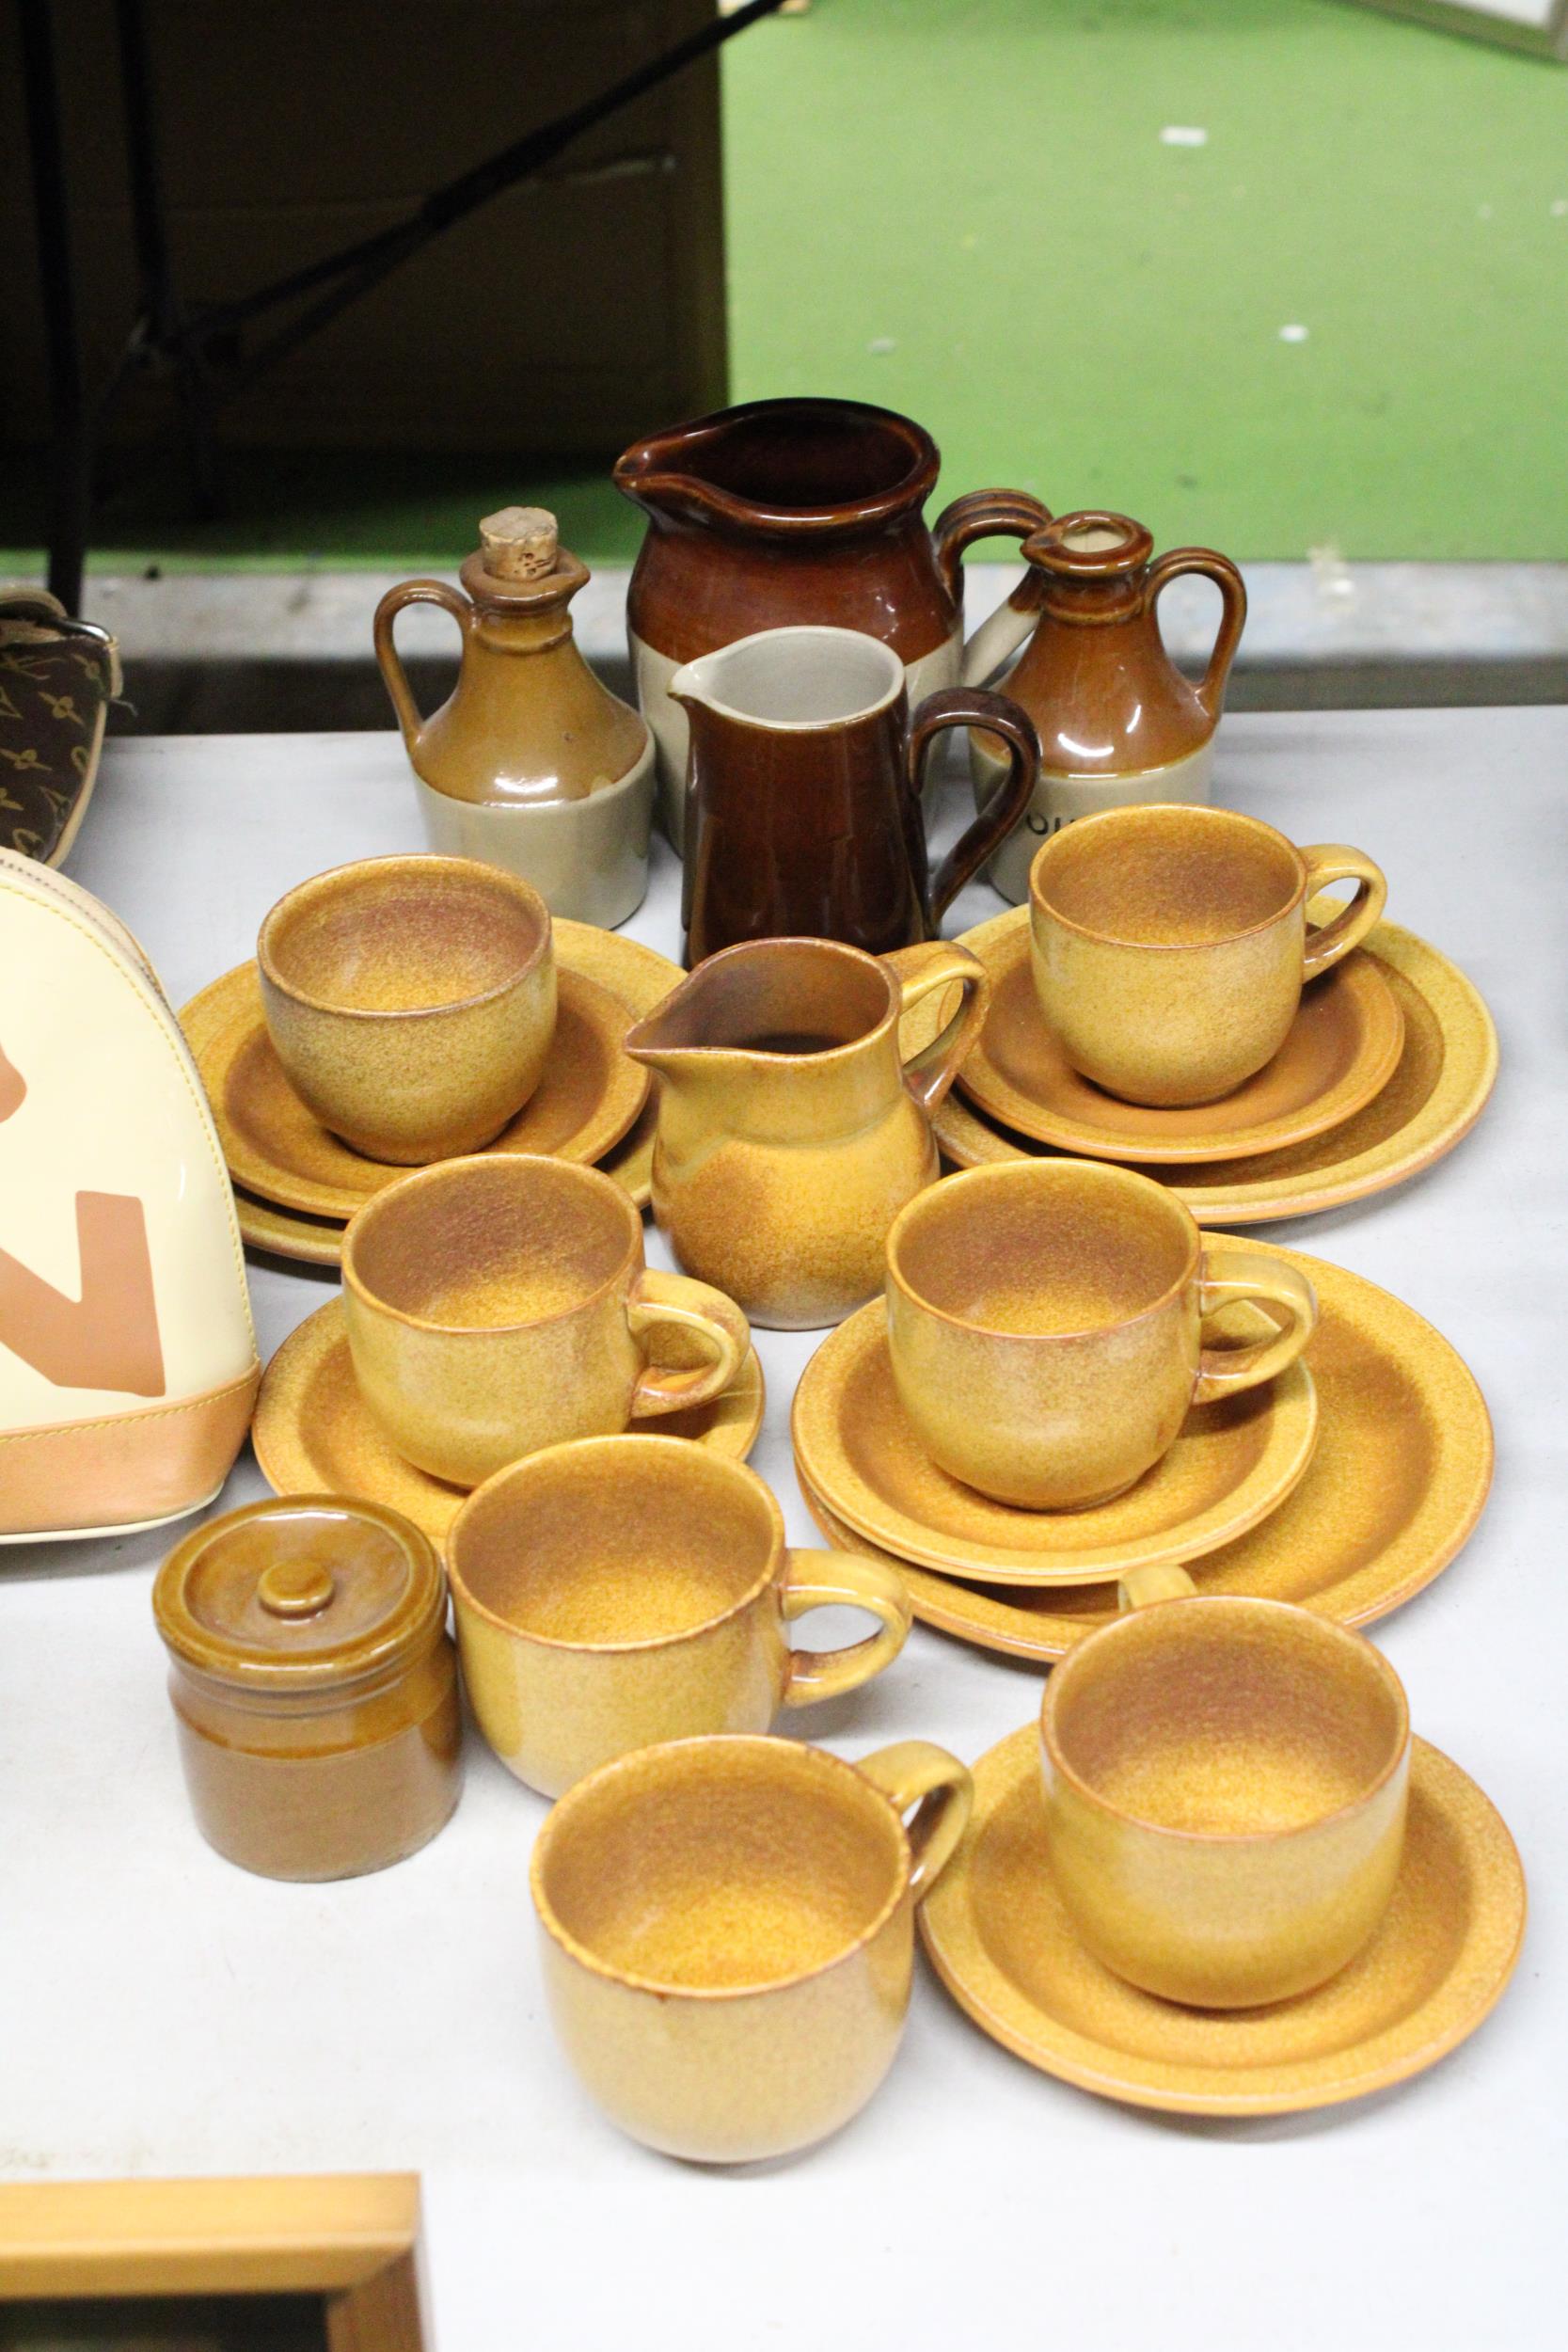 A STONEWARE COFFEE SET TO INCLUDE A CREAM JUG, SUGAR BOWL, CUPS, SAUCERS AND SIDE PLATES, PLUS JUGS,